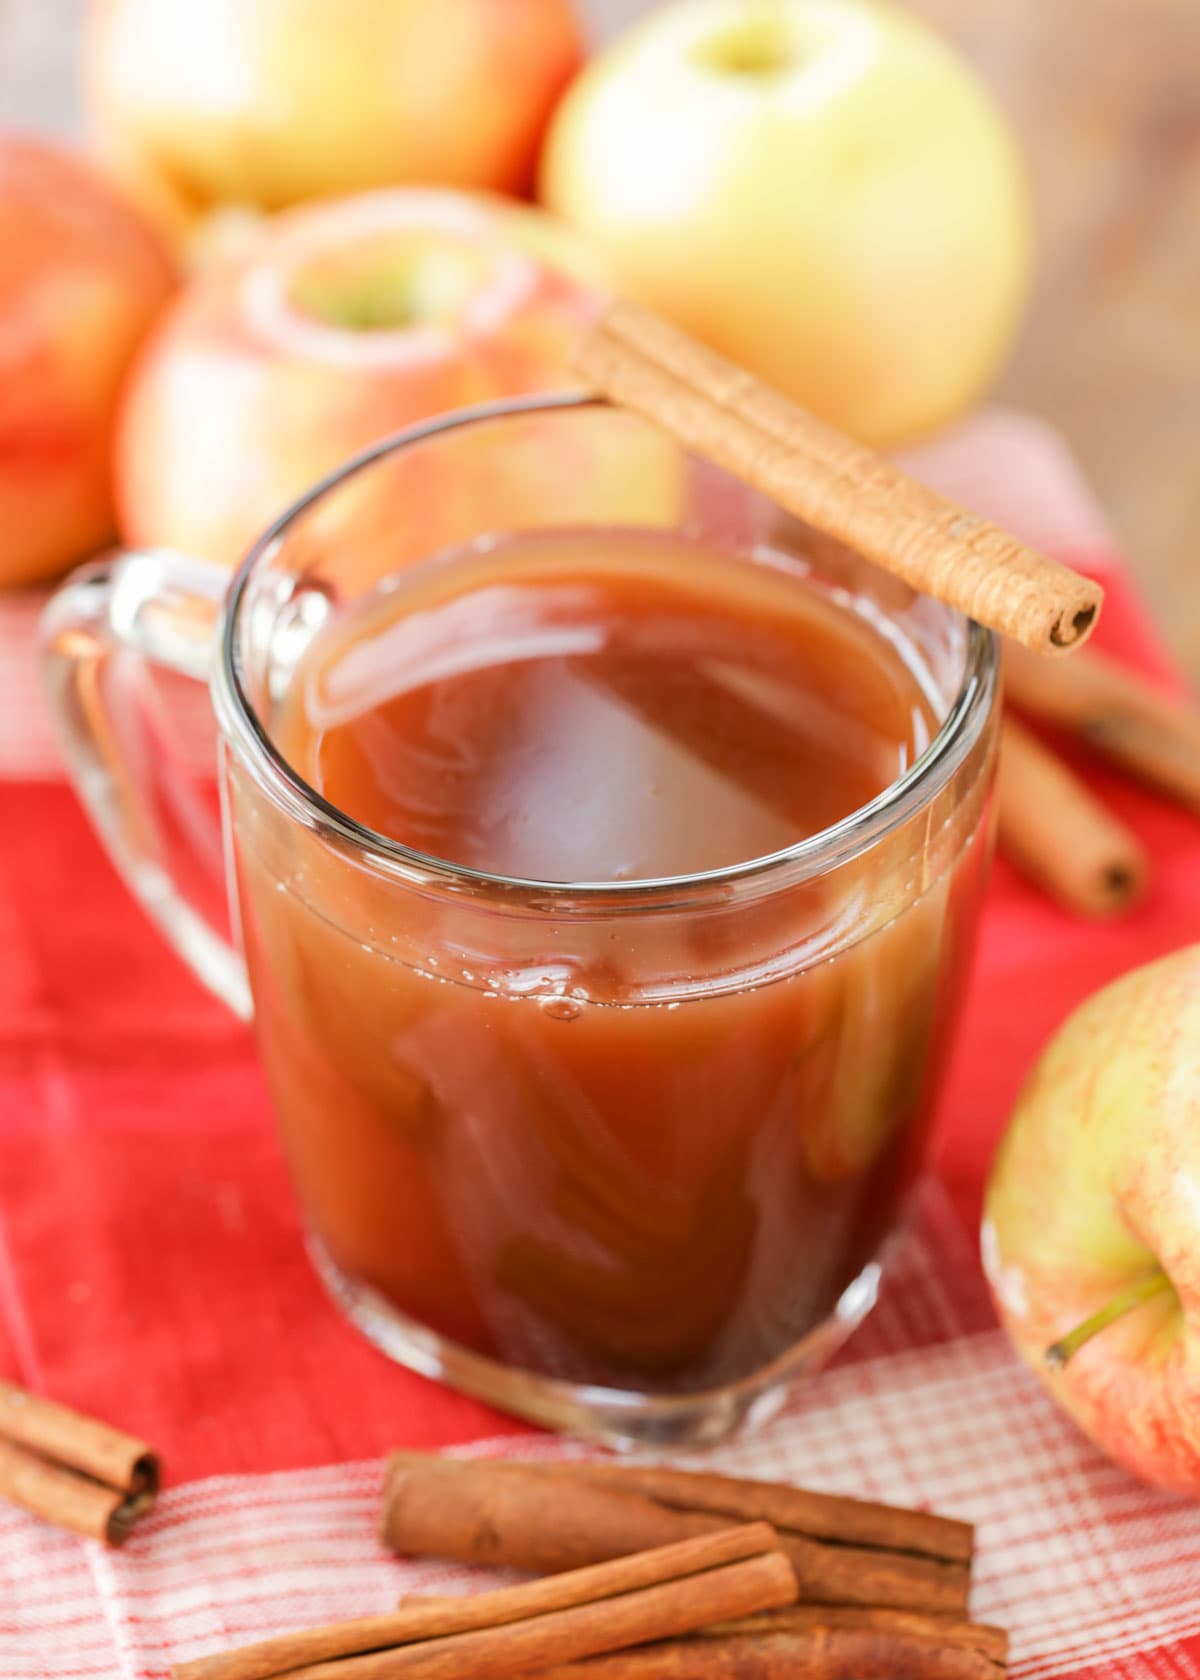 Glass cup of hot apple cider recipe garnished with a cinnamon stick.